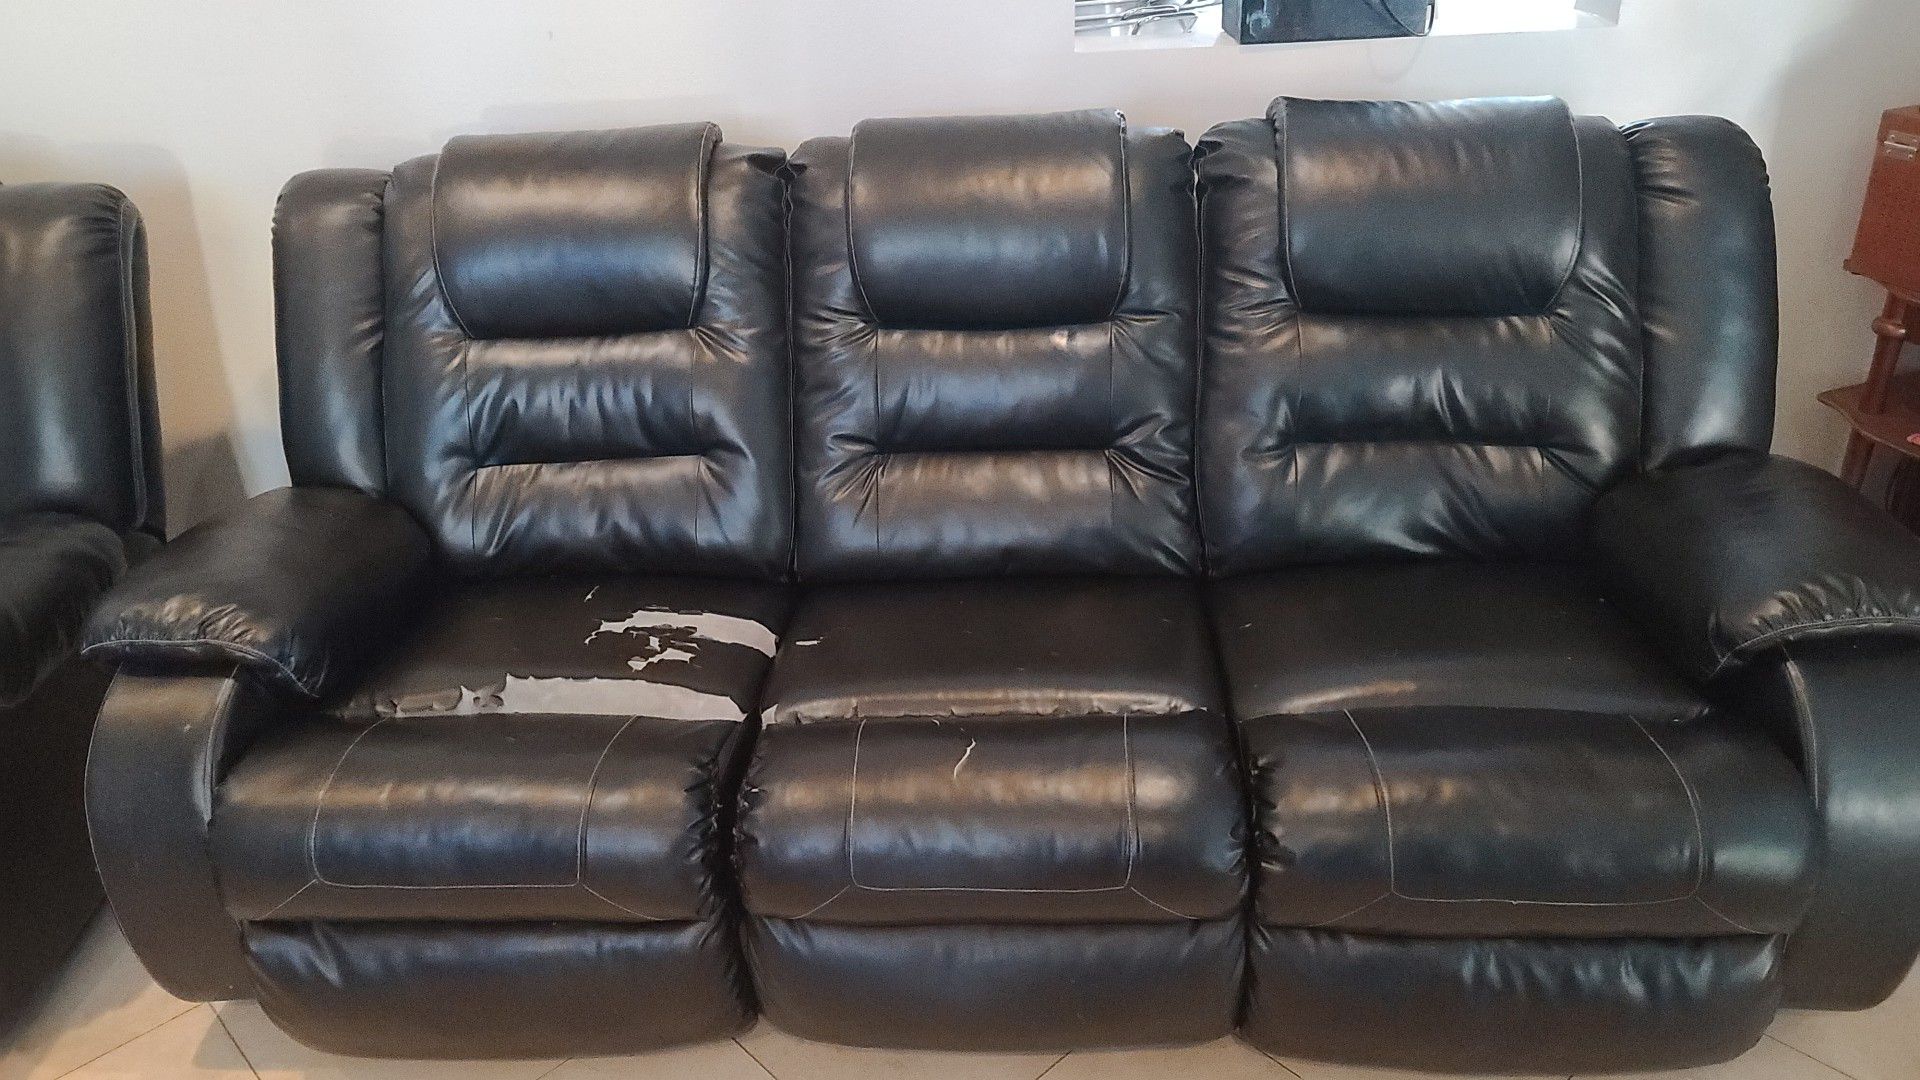 Ashley's Recliner 3 seat Couch